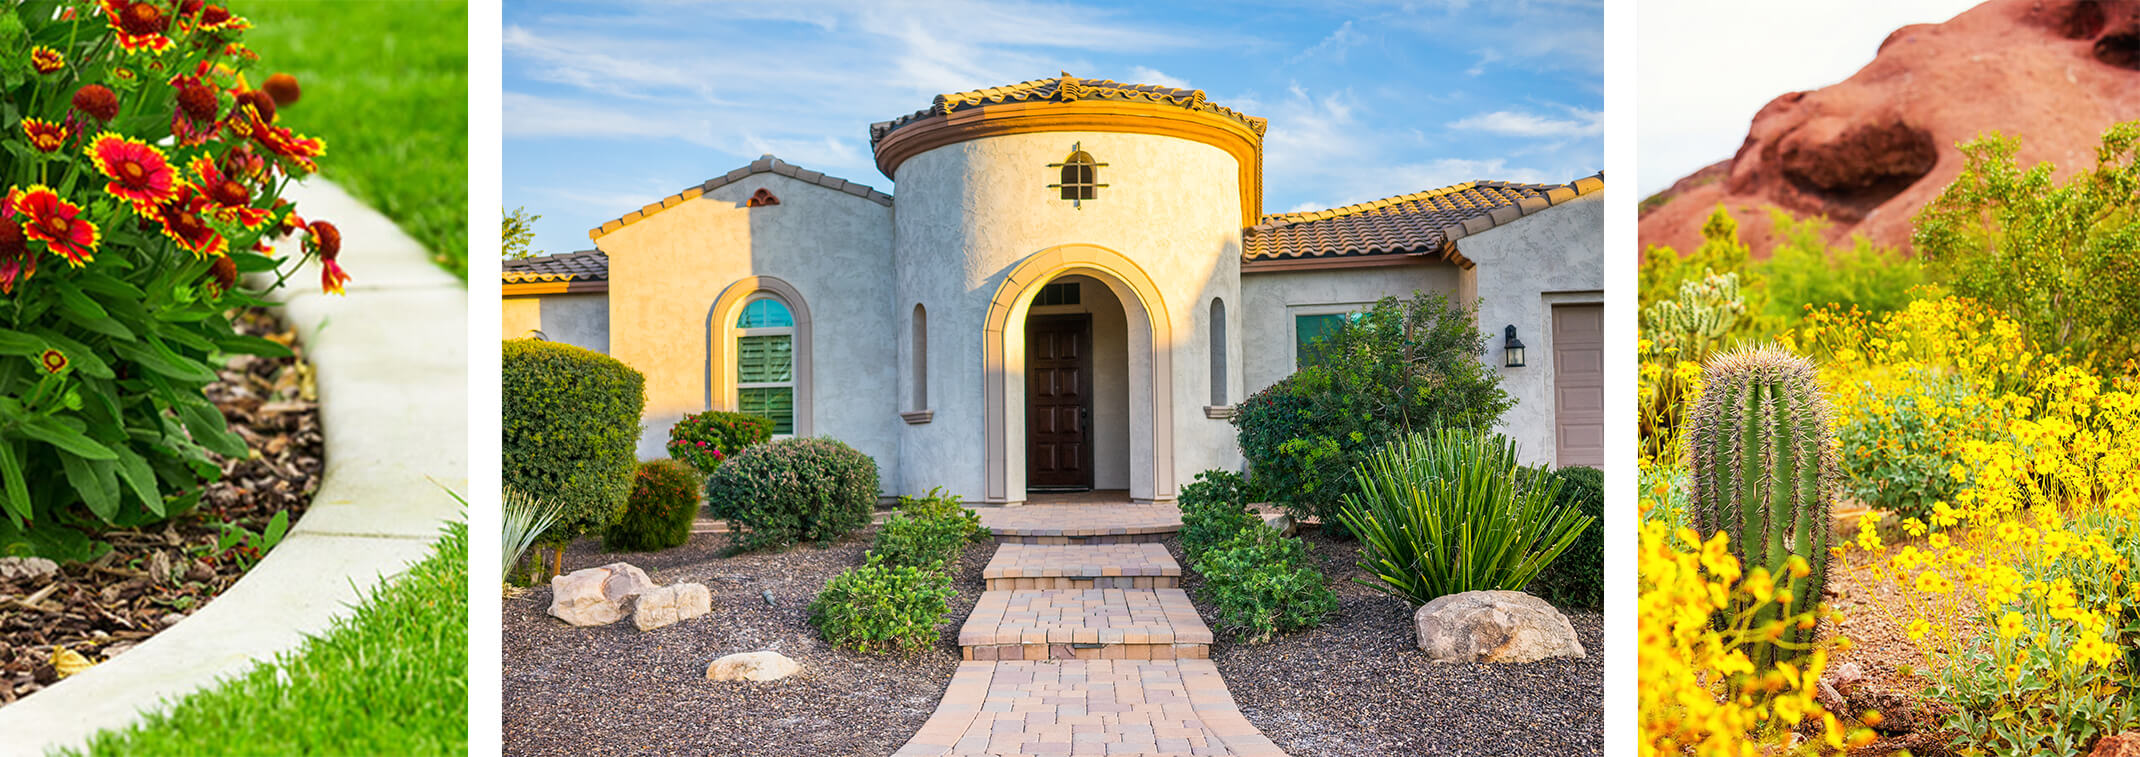 3 images: Gaillardia planted with mulch near concrete border and a lush green lawn; a beautiful Arizona house with a variety of plants surrounded by mulch and large rocks; and cacti and desert flowers in a desert landscape with red rock mountains in the background